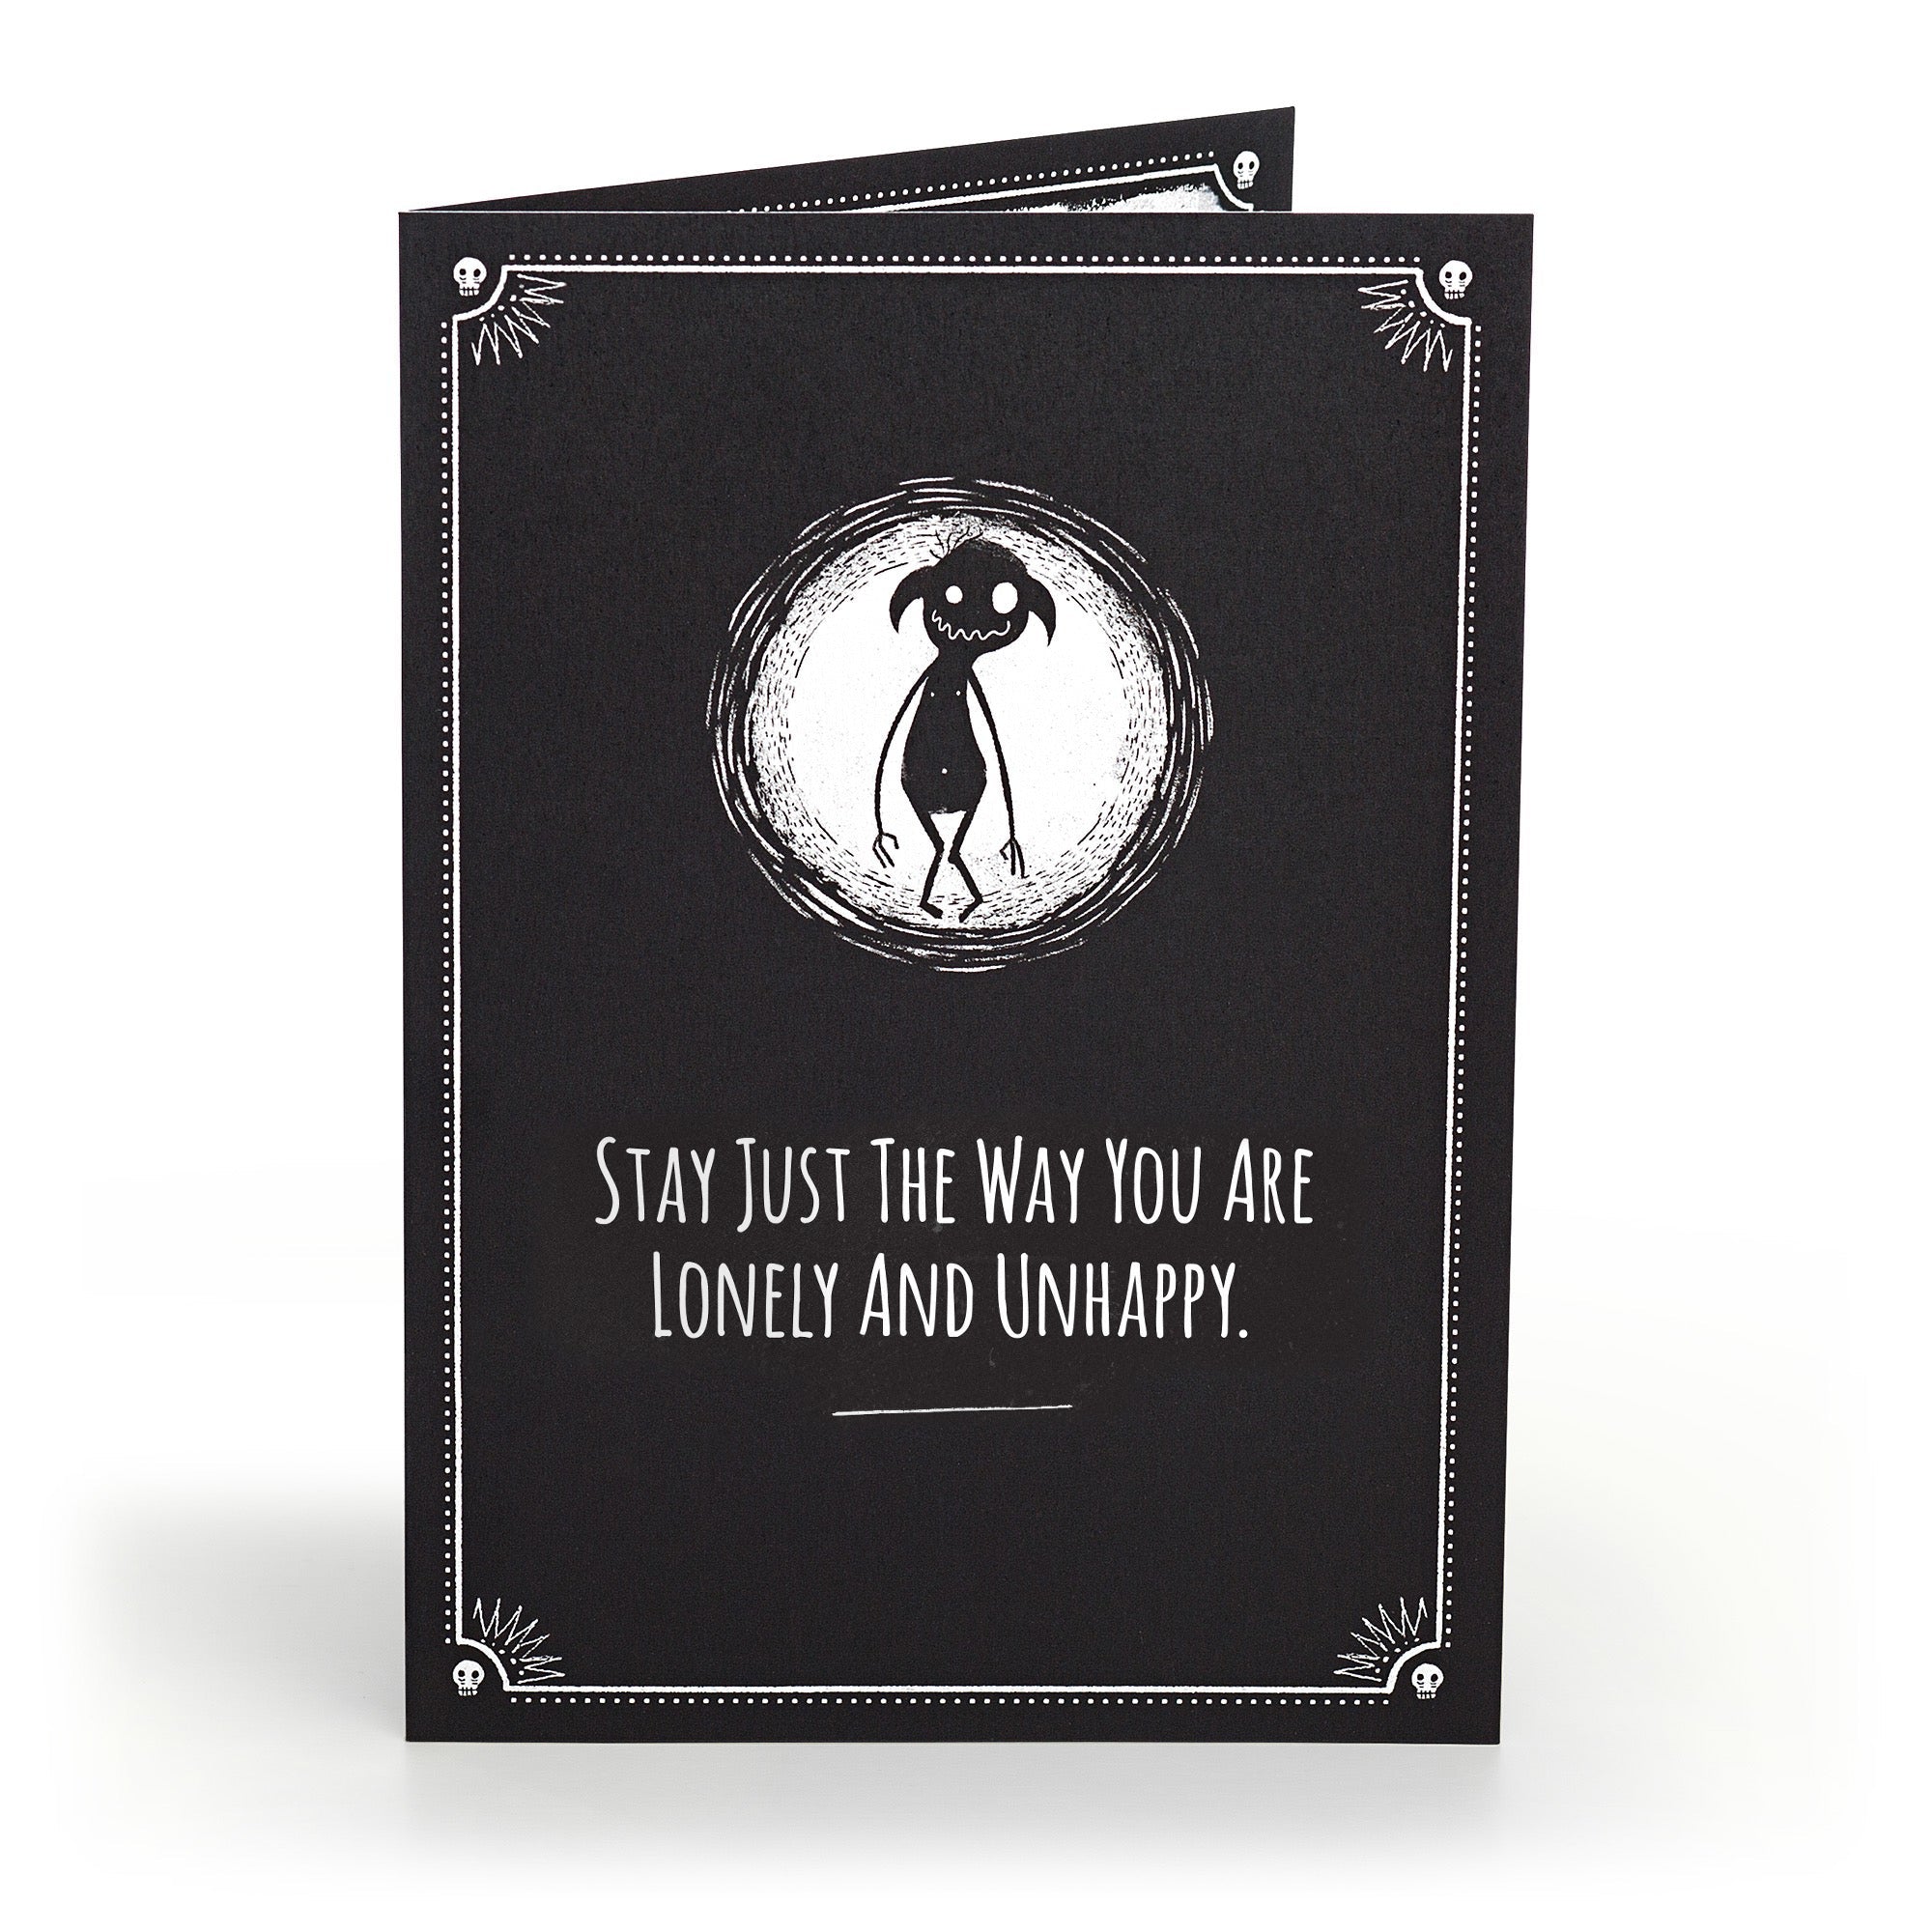 Stay just the way you are - darkling.be